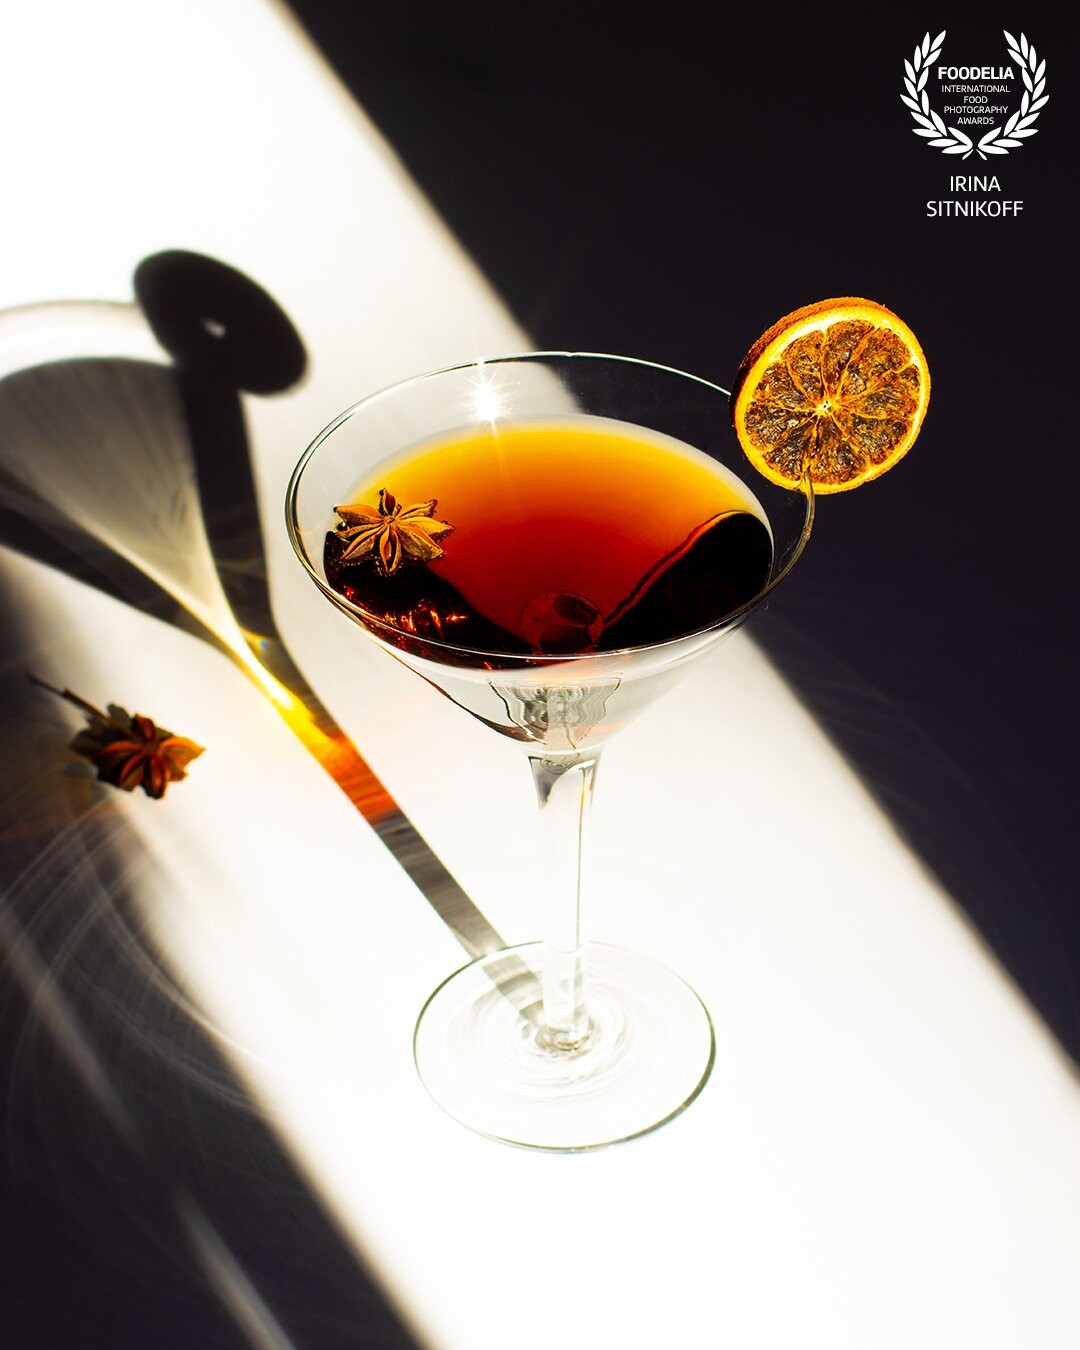 This photo was one of my assignments for the Le Cordon Bleu Food Photography course, practice with the hard light. I wanted to make this photo with brown color, and used simple Kvas drink (Eastern European drink) that worked the magic with color!